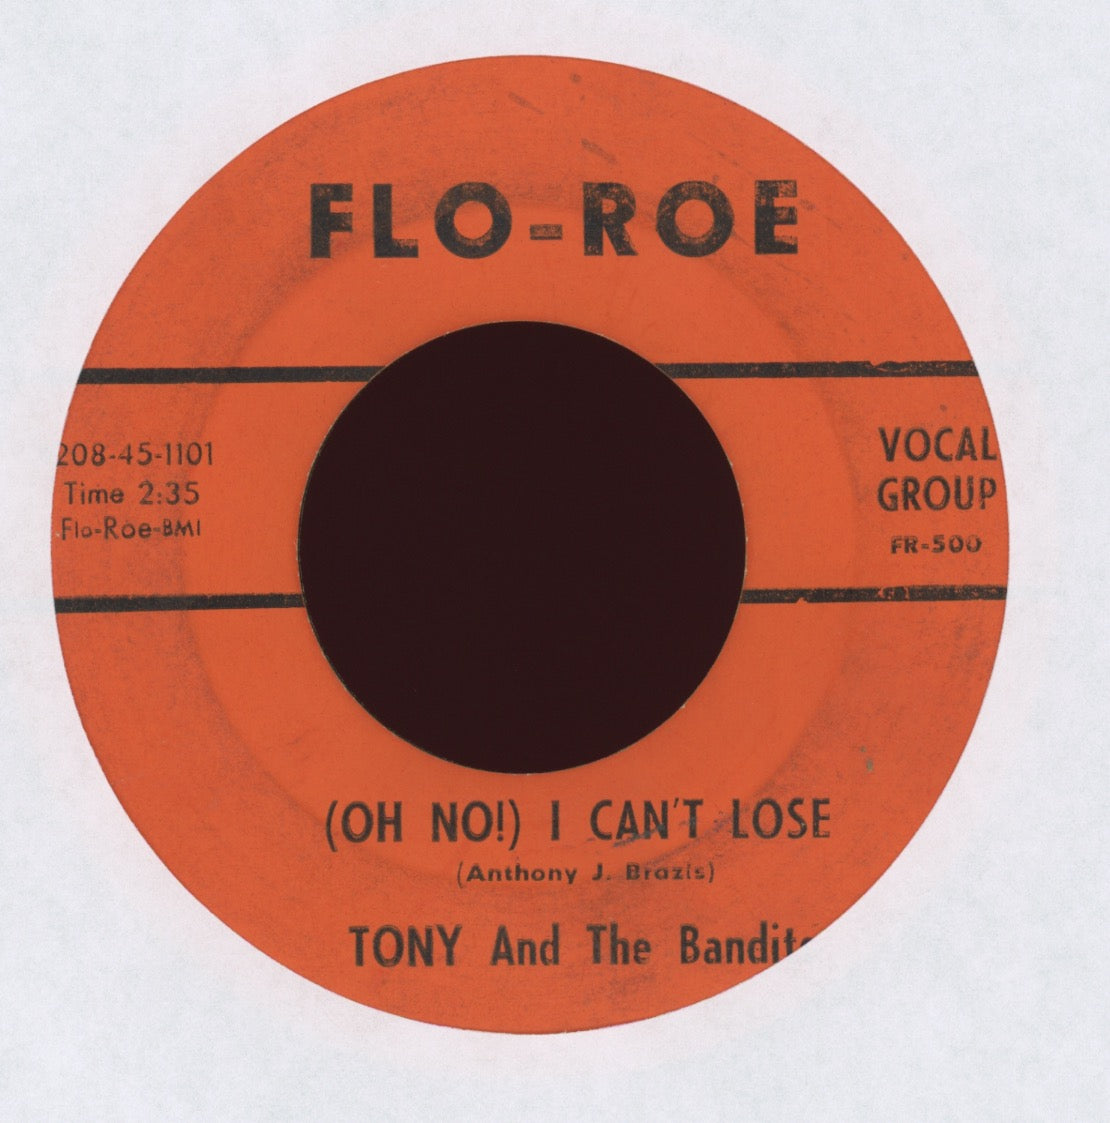 Tony And The Bandits - It's A Bit Of Alright on Flo-Roe